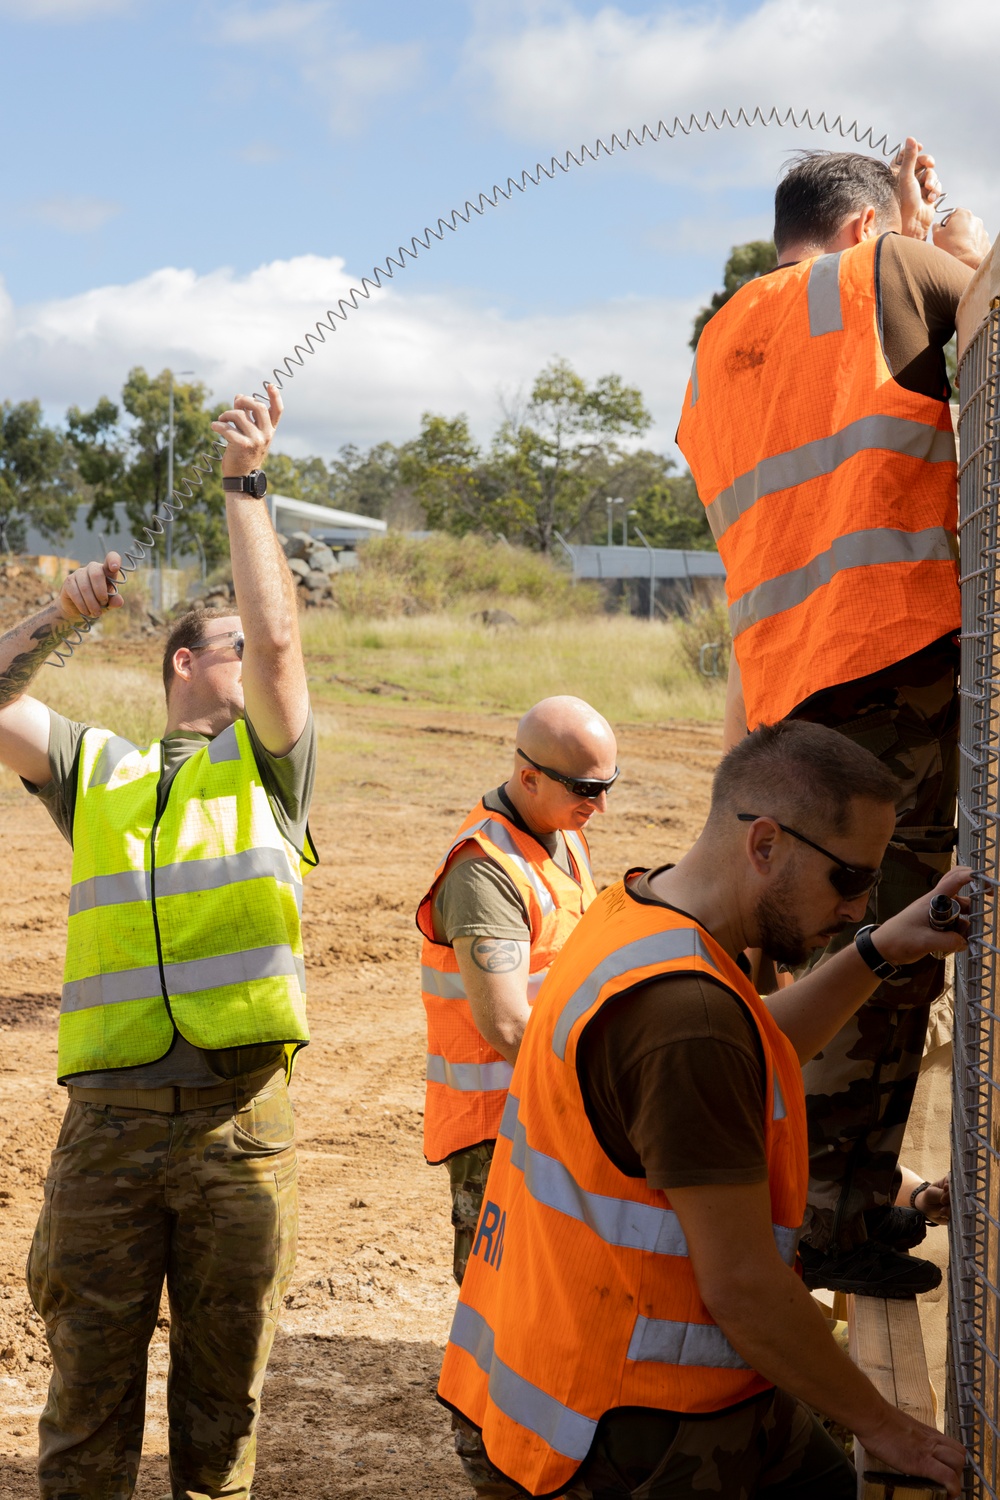 MRF-D 24.3: U.S., Australia, France, Canada service members assemble HESCO concertainers during exercise Wallaby Walk 24